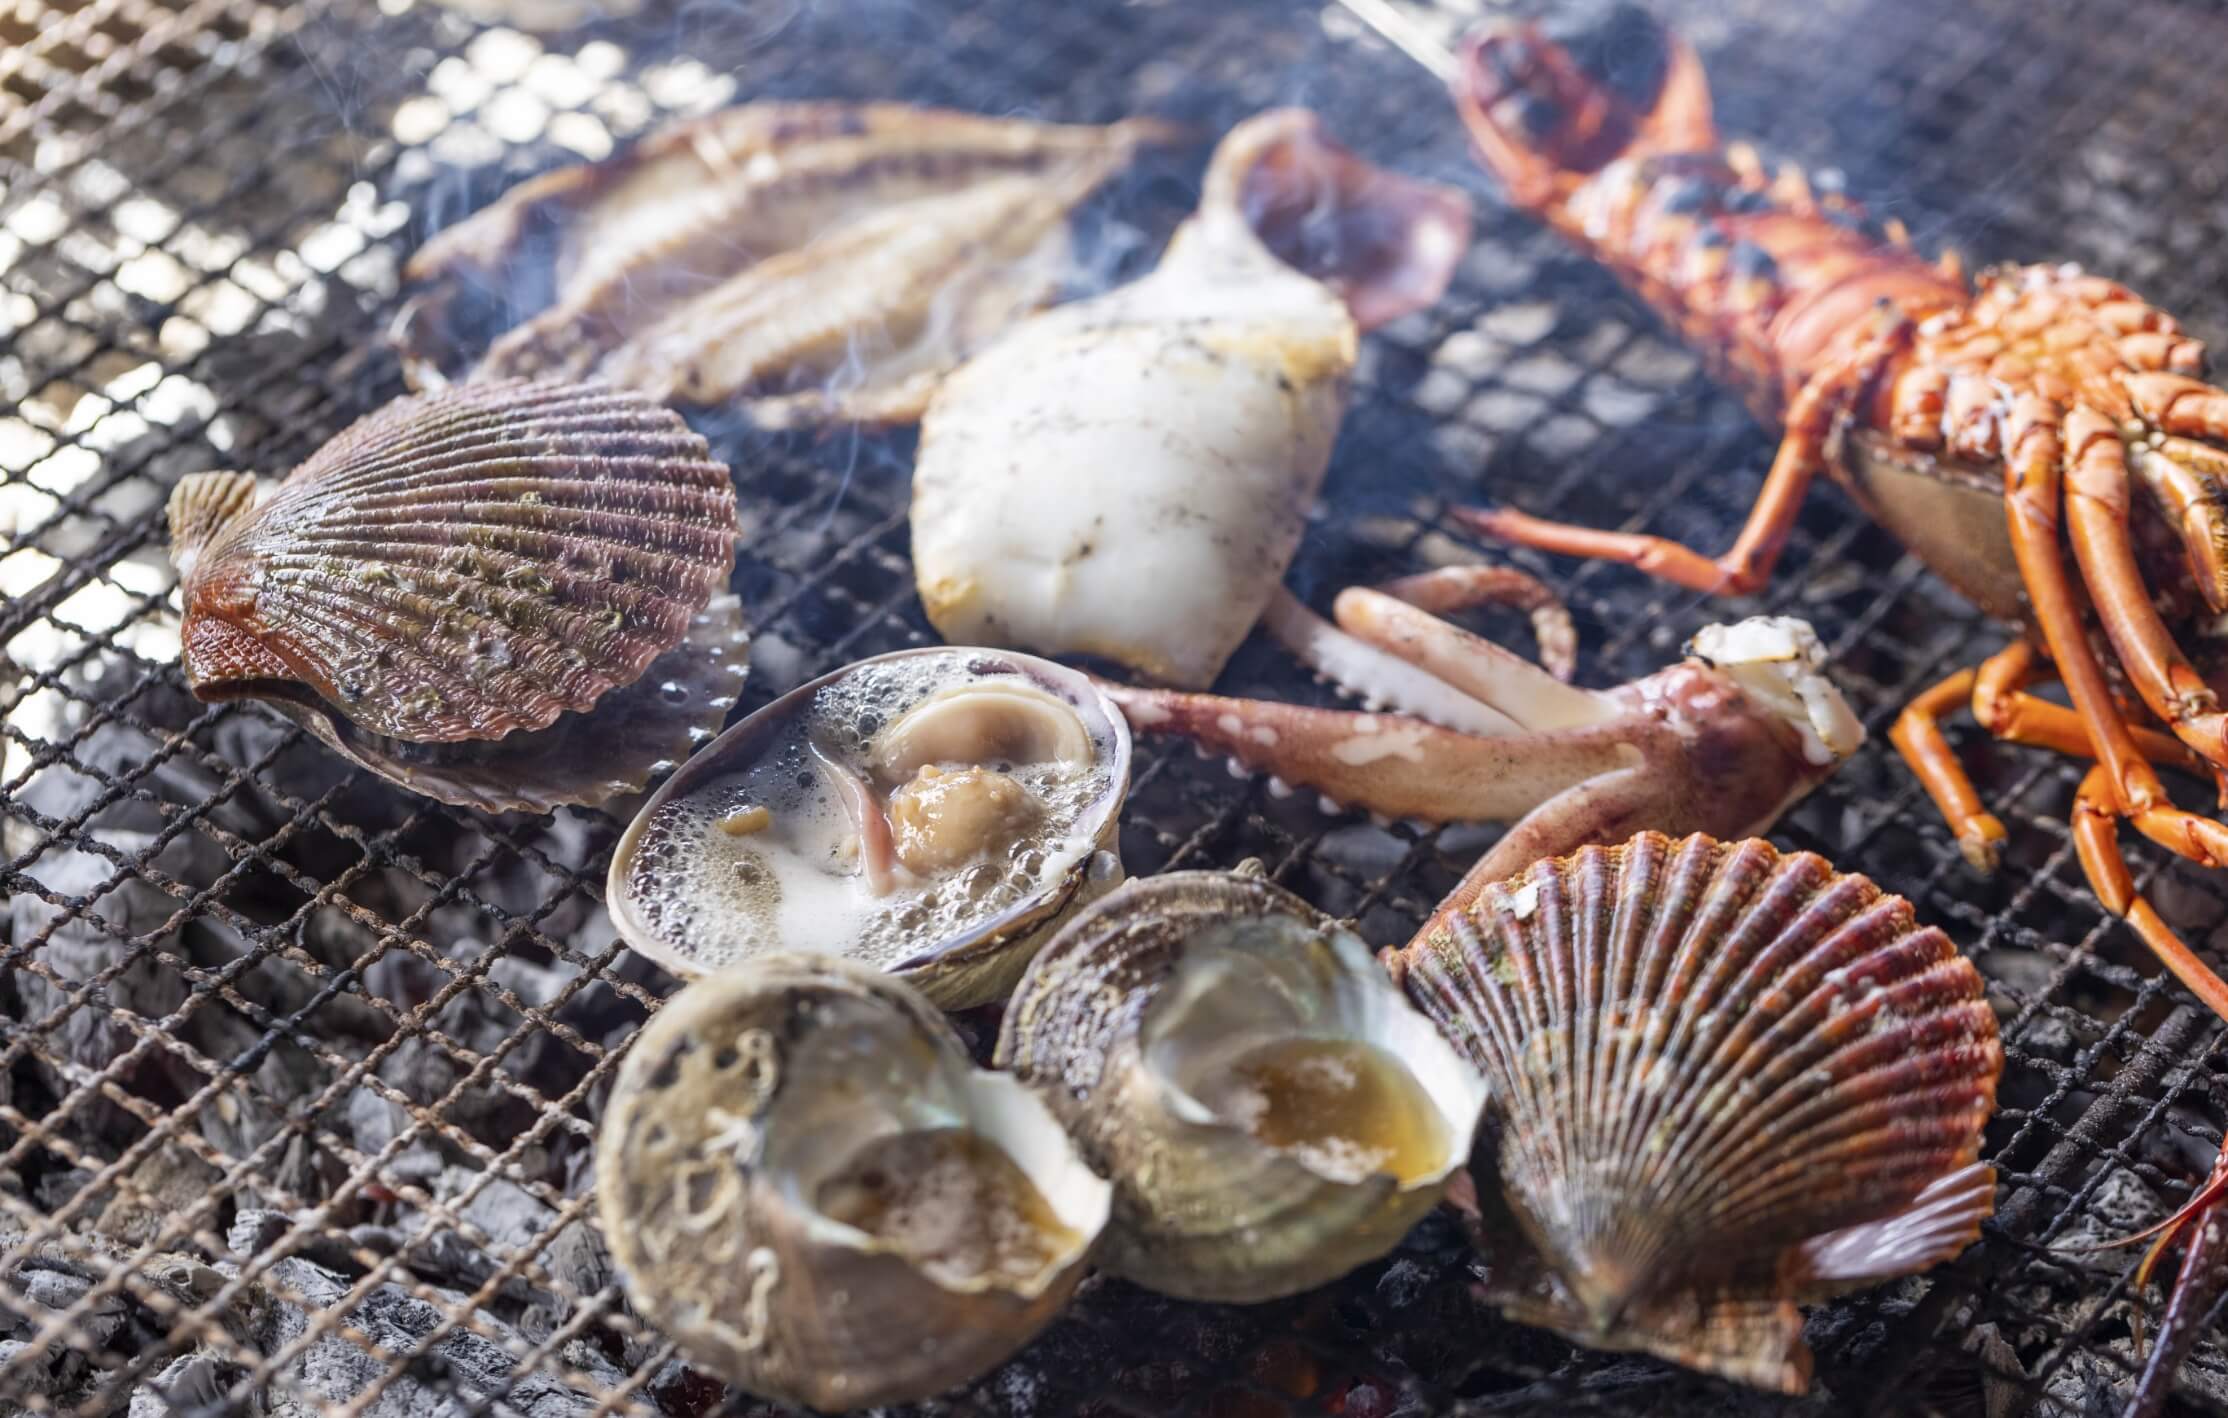 Feel the nature of Shima and enjoy seafood and mountain delicacies